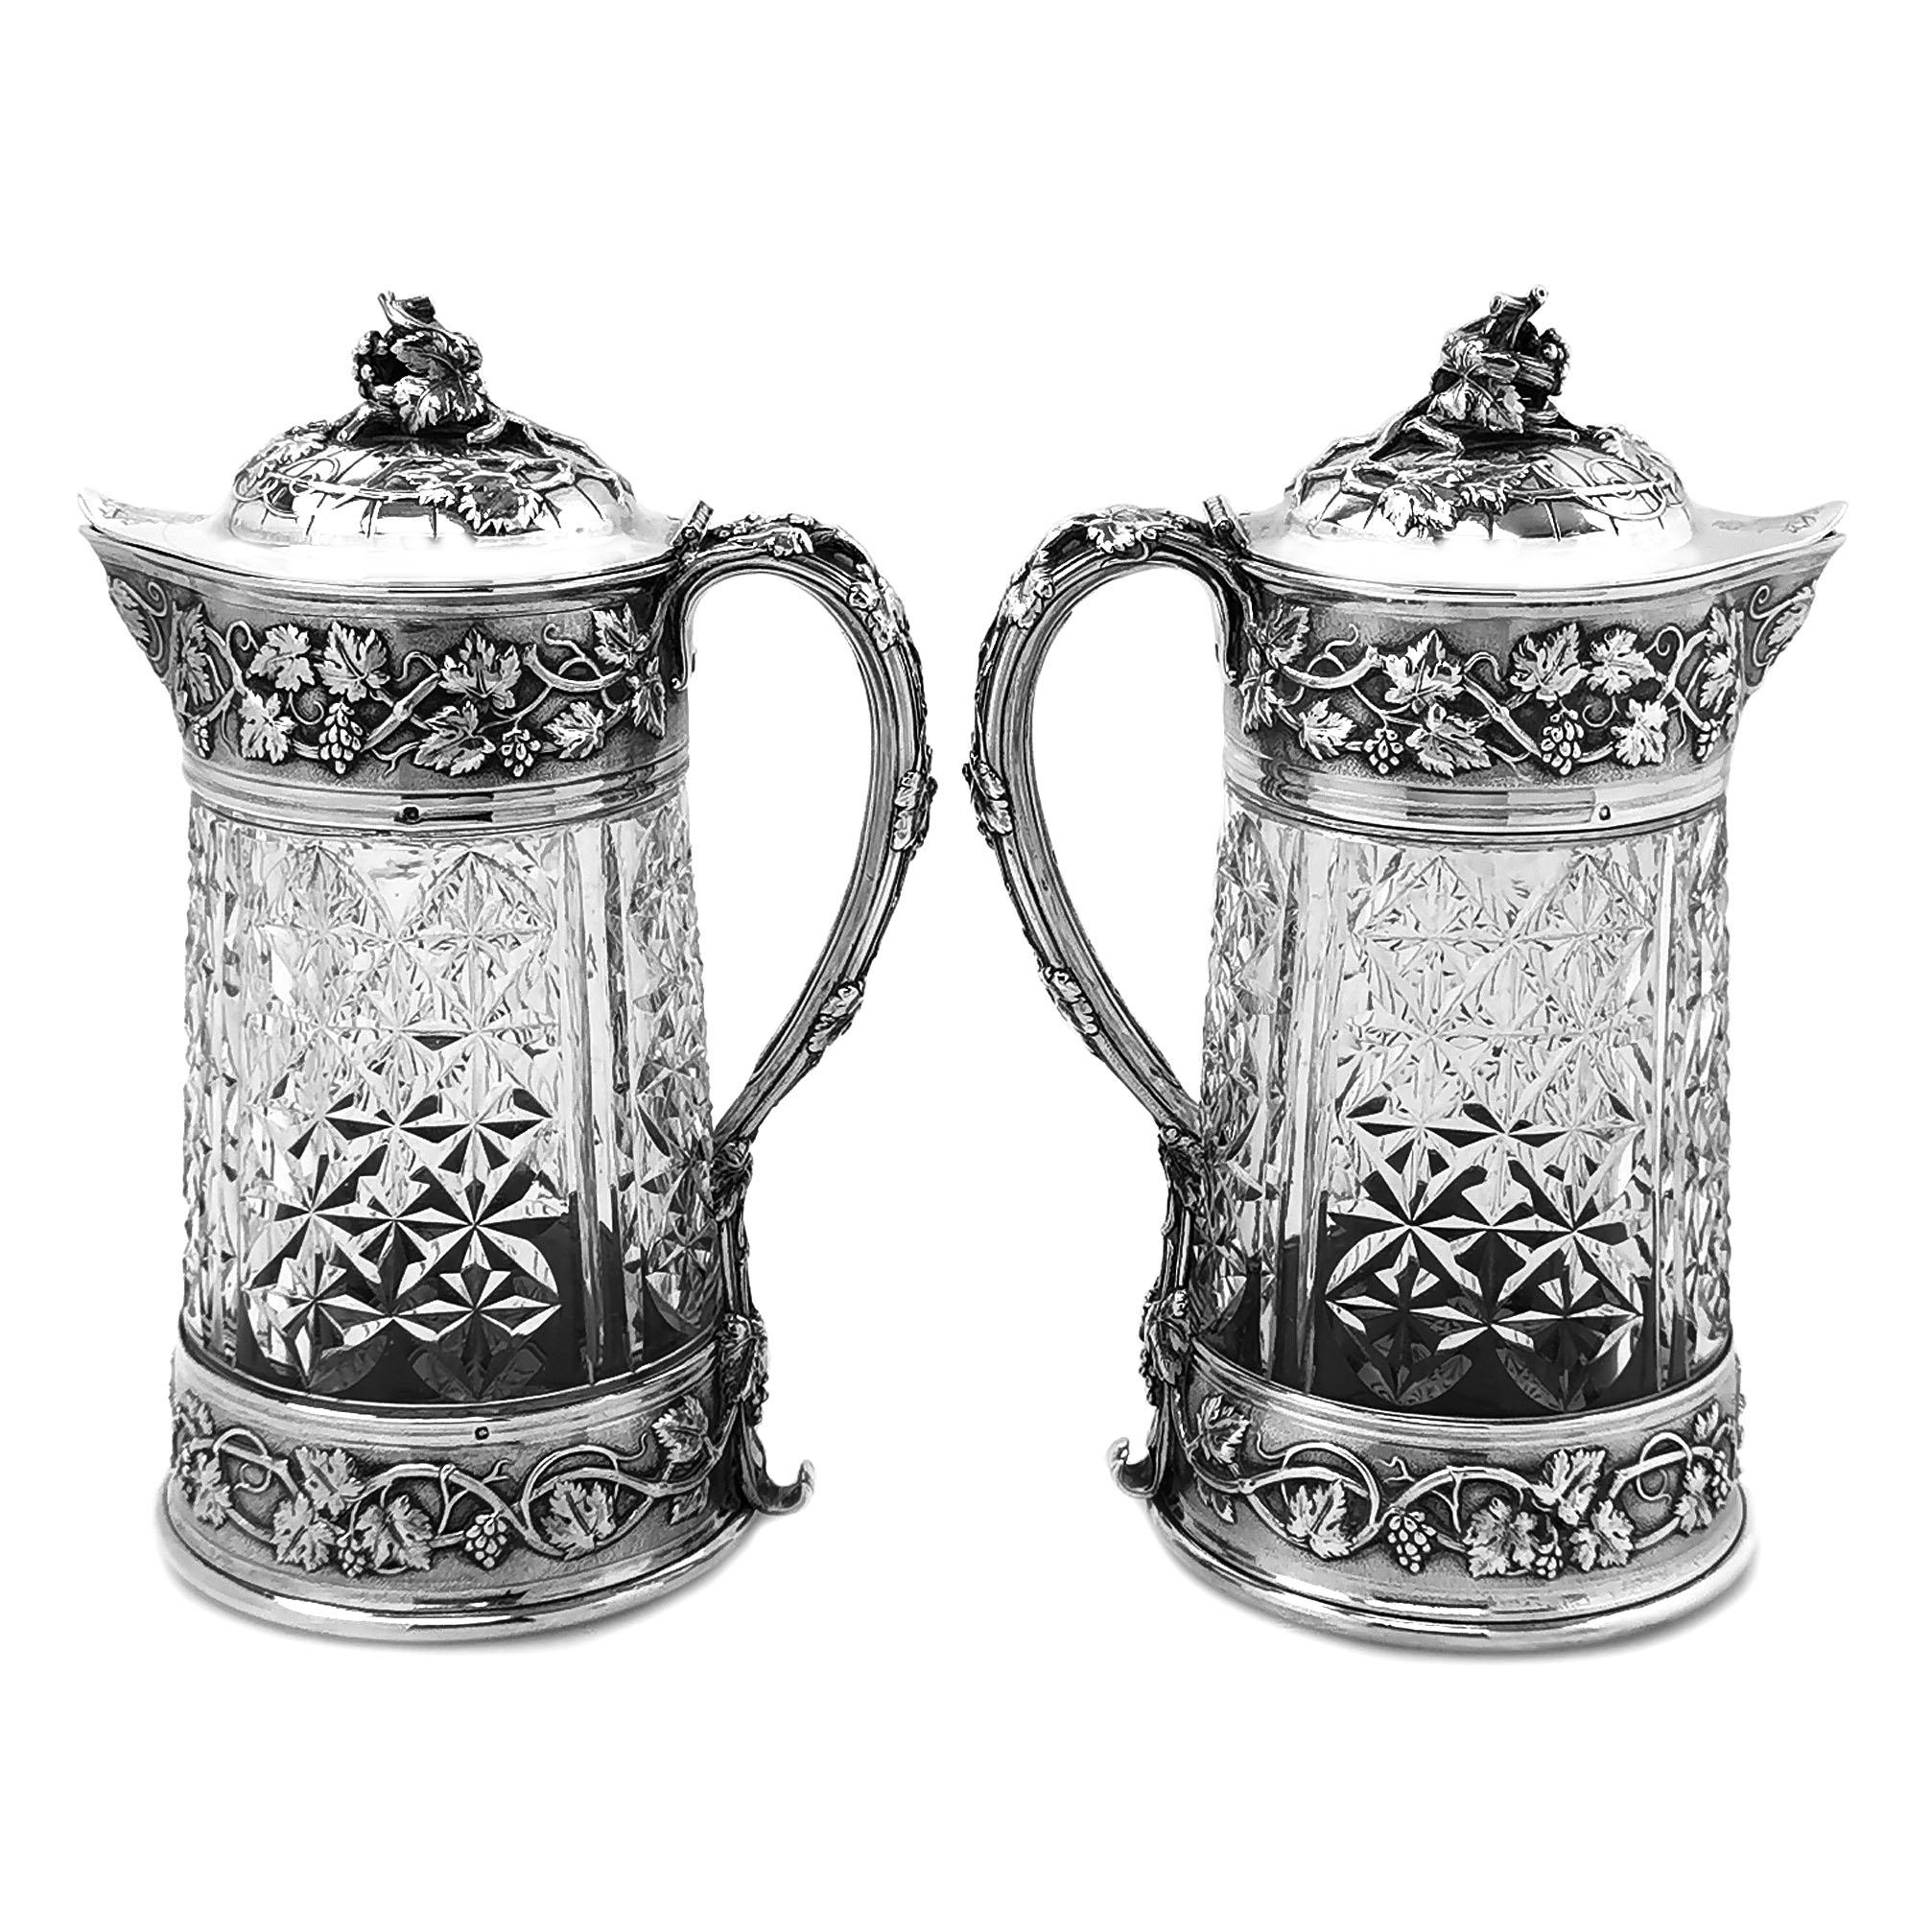 A magnificent pair of Antique French Silver and cut glass Claret Jugs. These 19th century Wine Jugs are of notably large size, and are embellished with an impressive chased grape vine design on the silver neck and base. The domed lid and elegantly